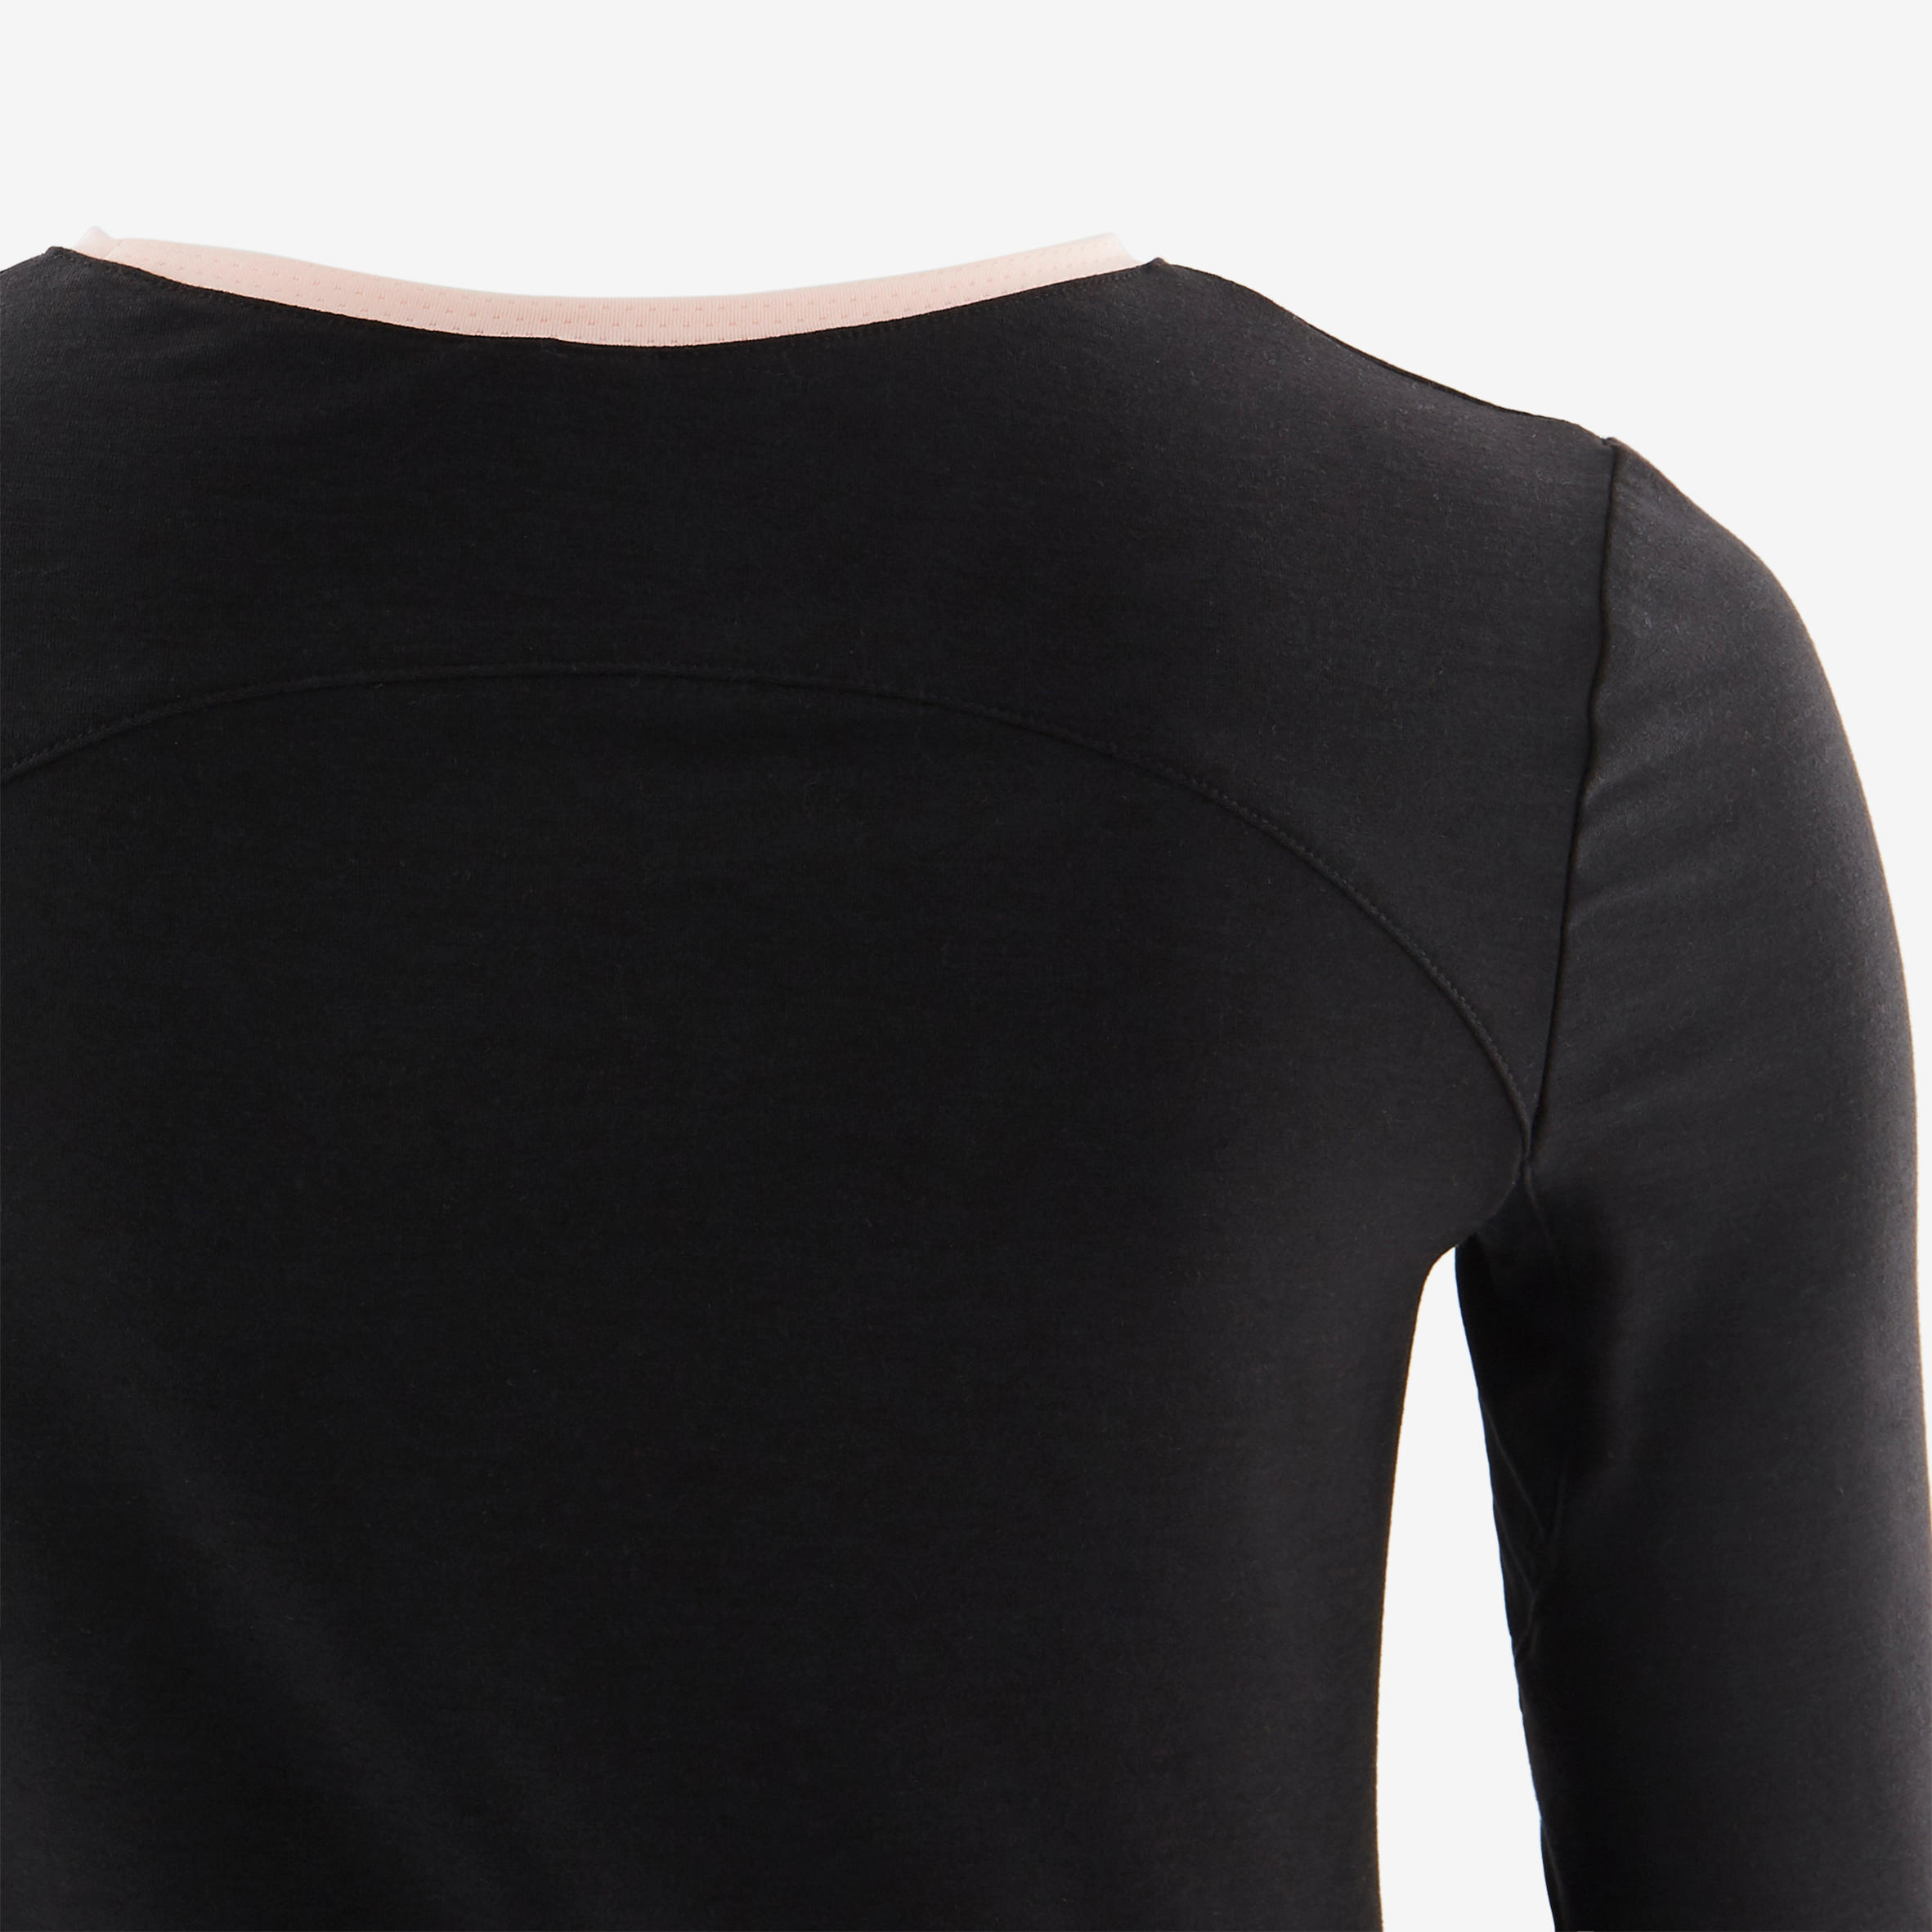 Kids' Long-Sleeved Breathable Cotton Gym T-Shirt 500 - Black/Pink 5/6